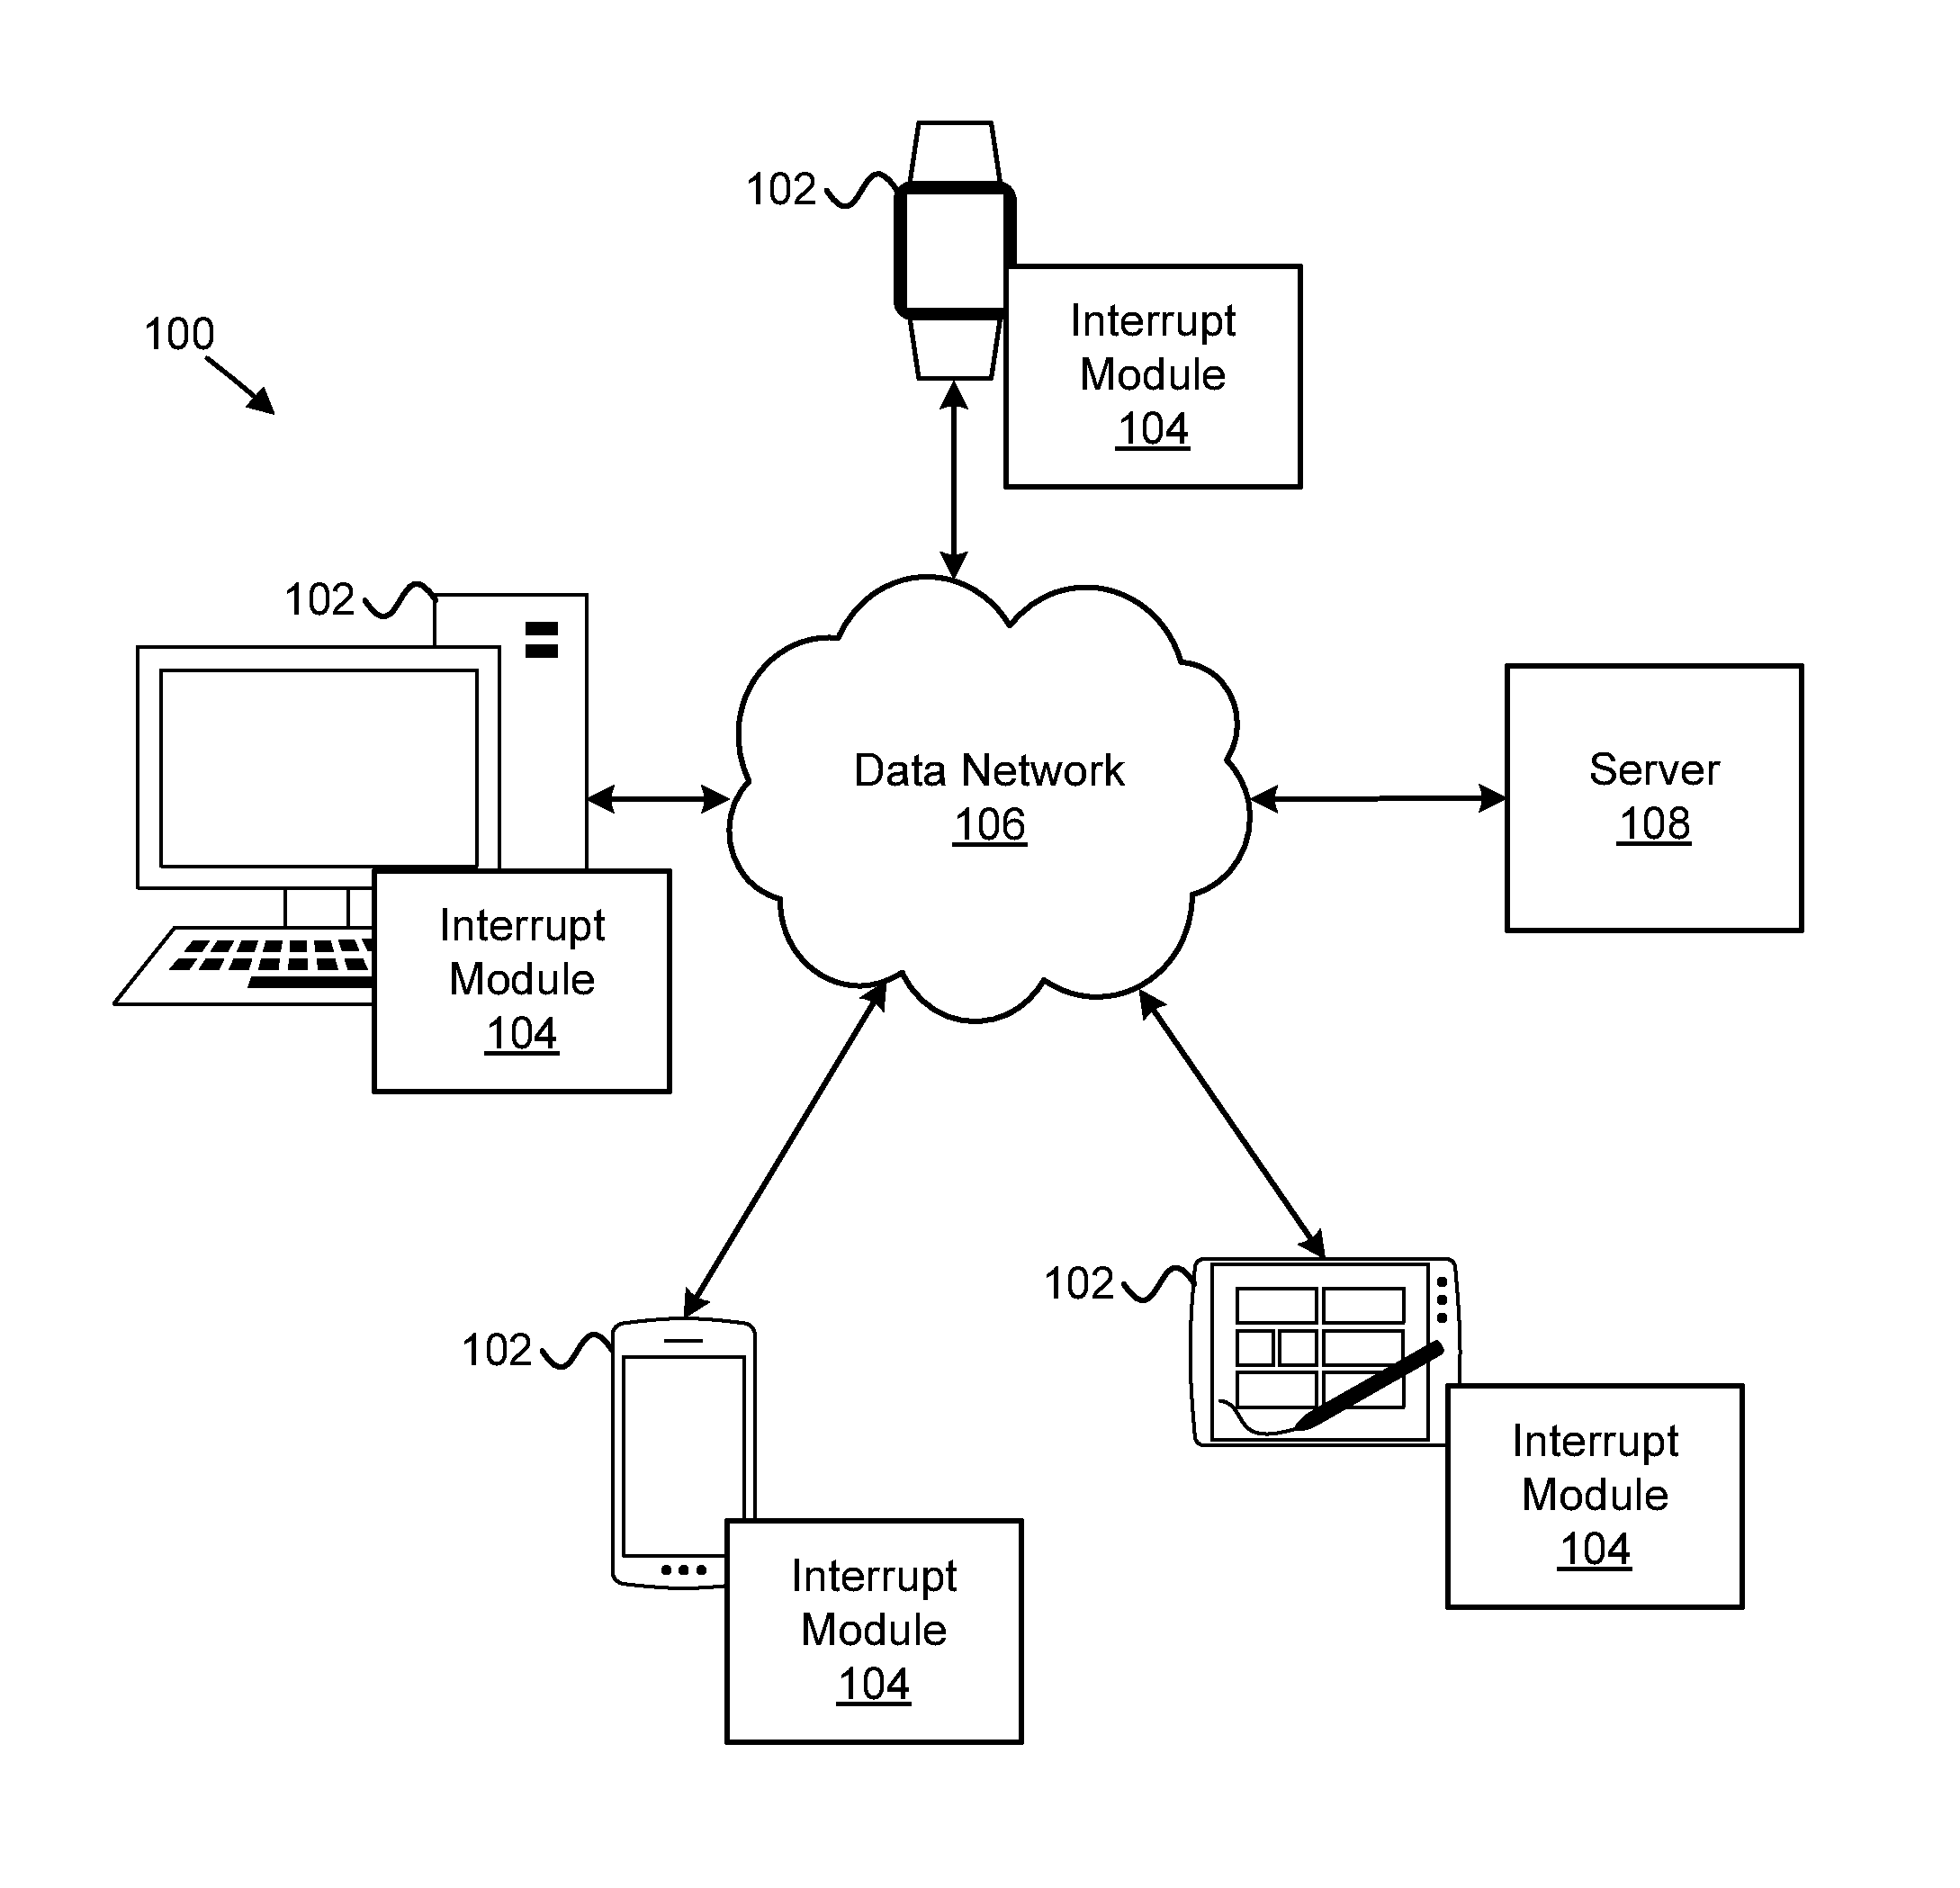 Executing a voice command during voice input